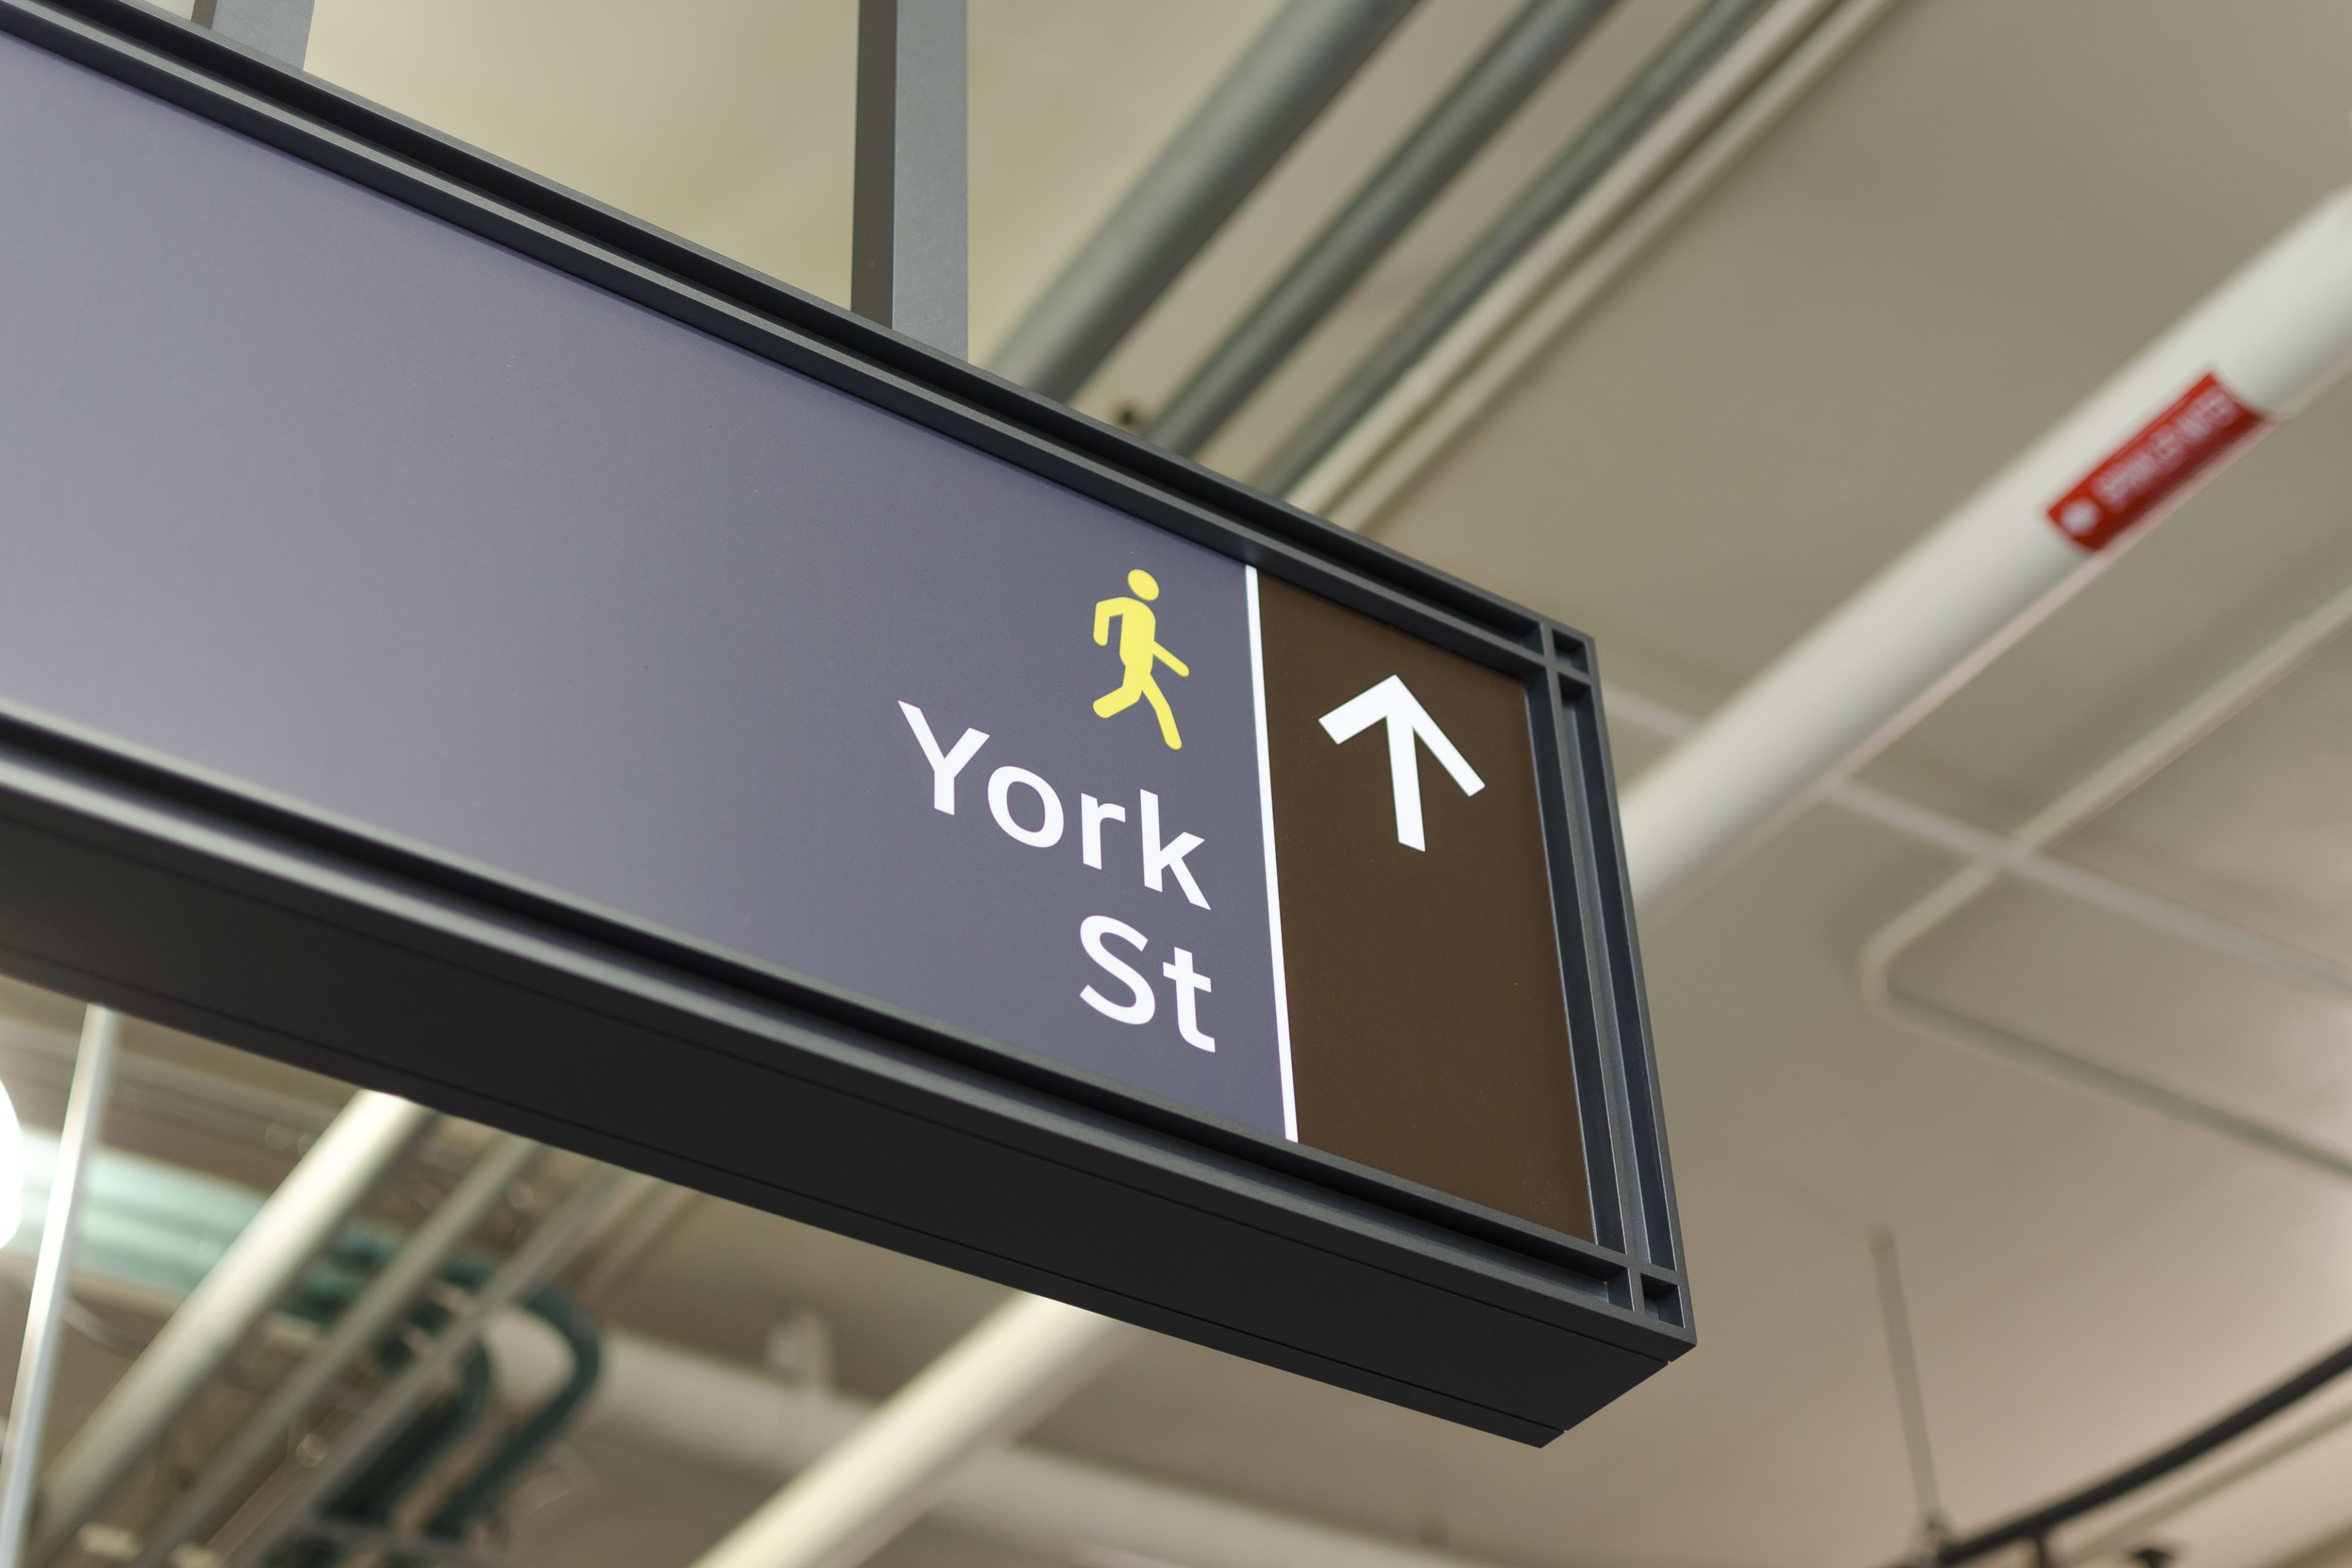 new signage directing transit users to York Street